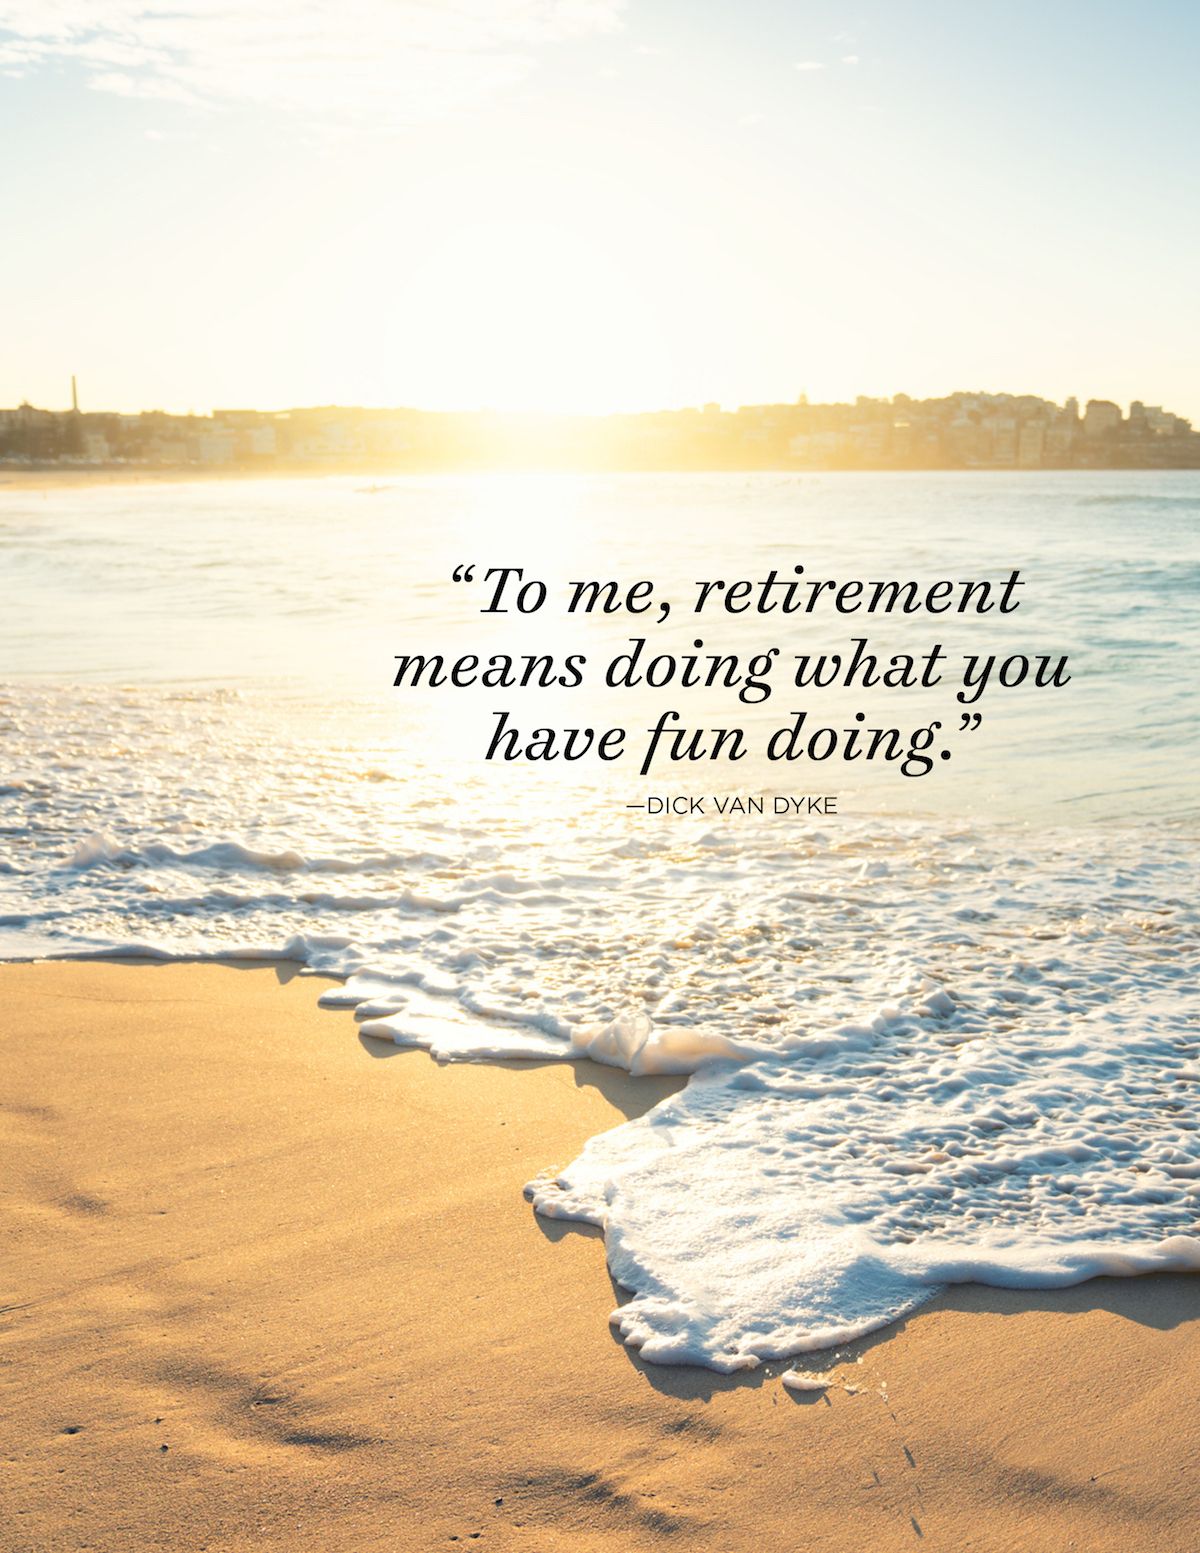 Funny Sayings About Retirement - trueanti-pcmilitarytales